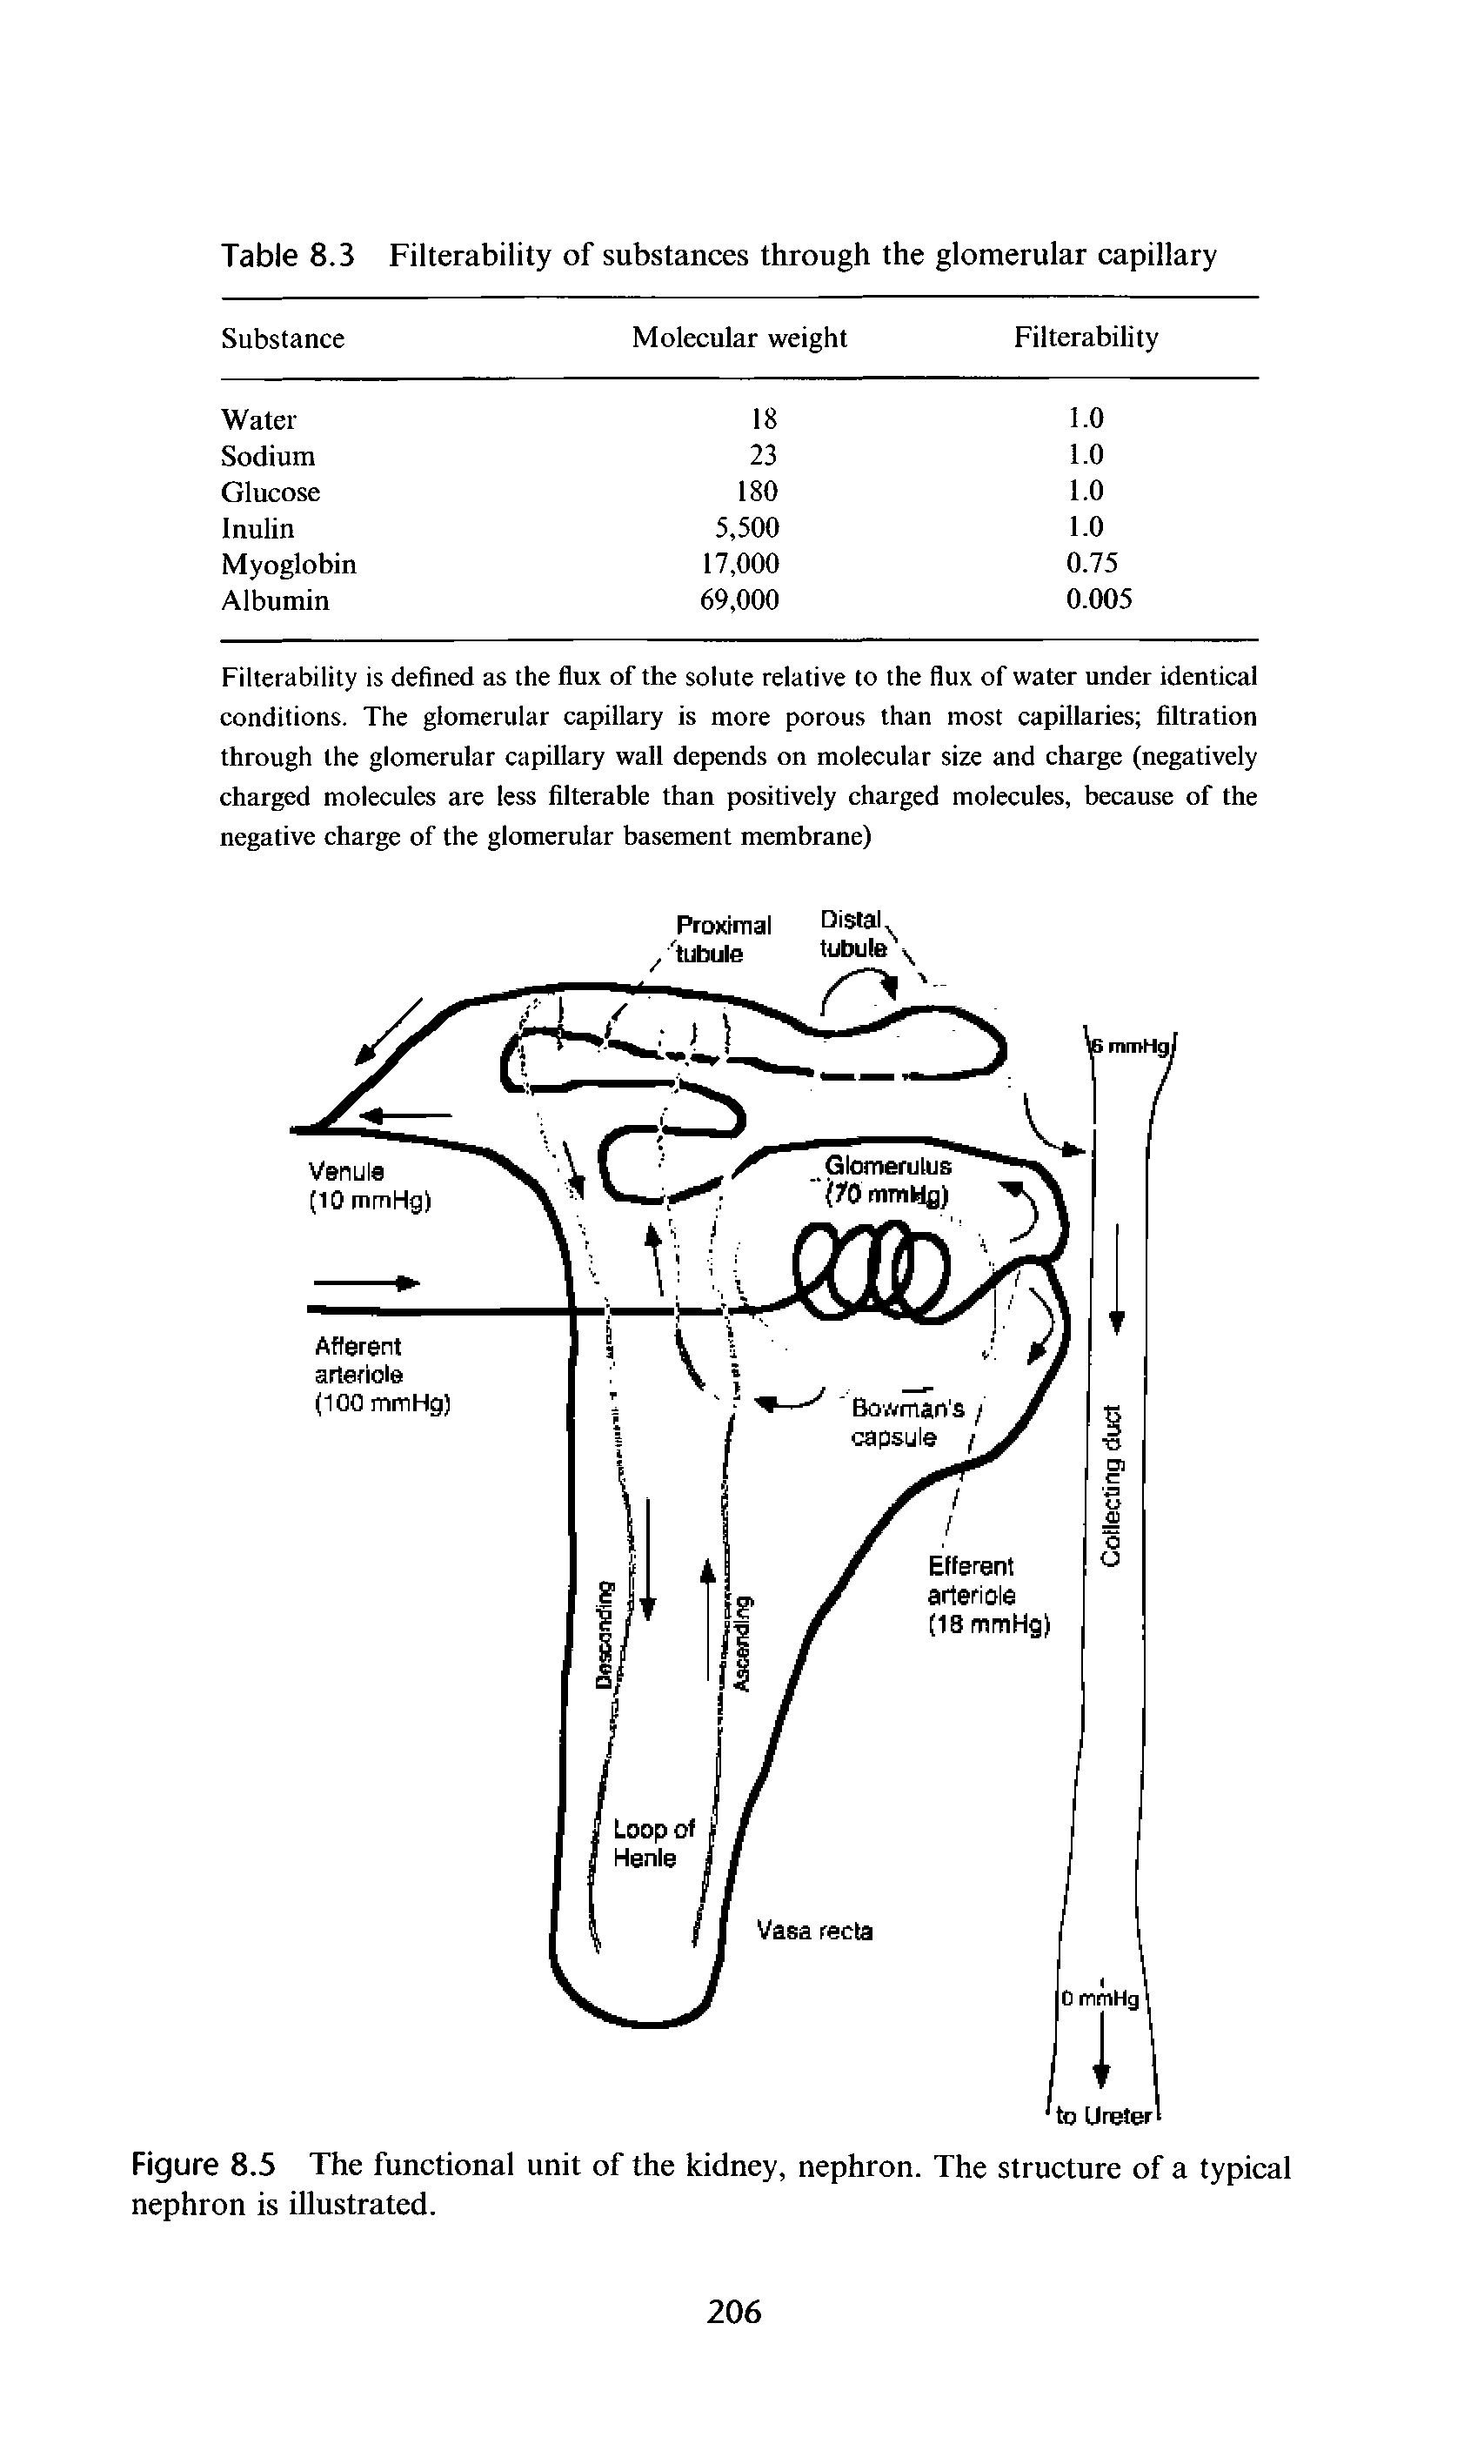 Figure 8.5 The functional unit of the kidney, nephron. The structure of a typical nephron is illustrated.